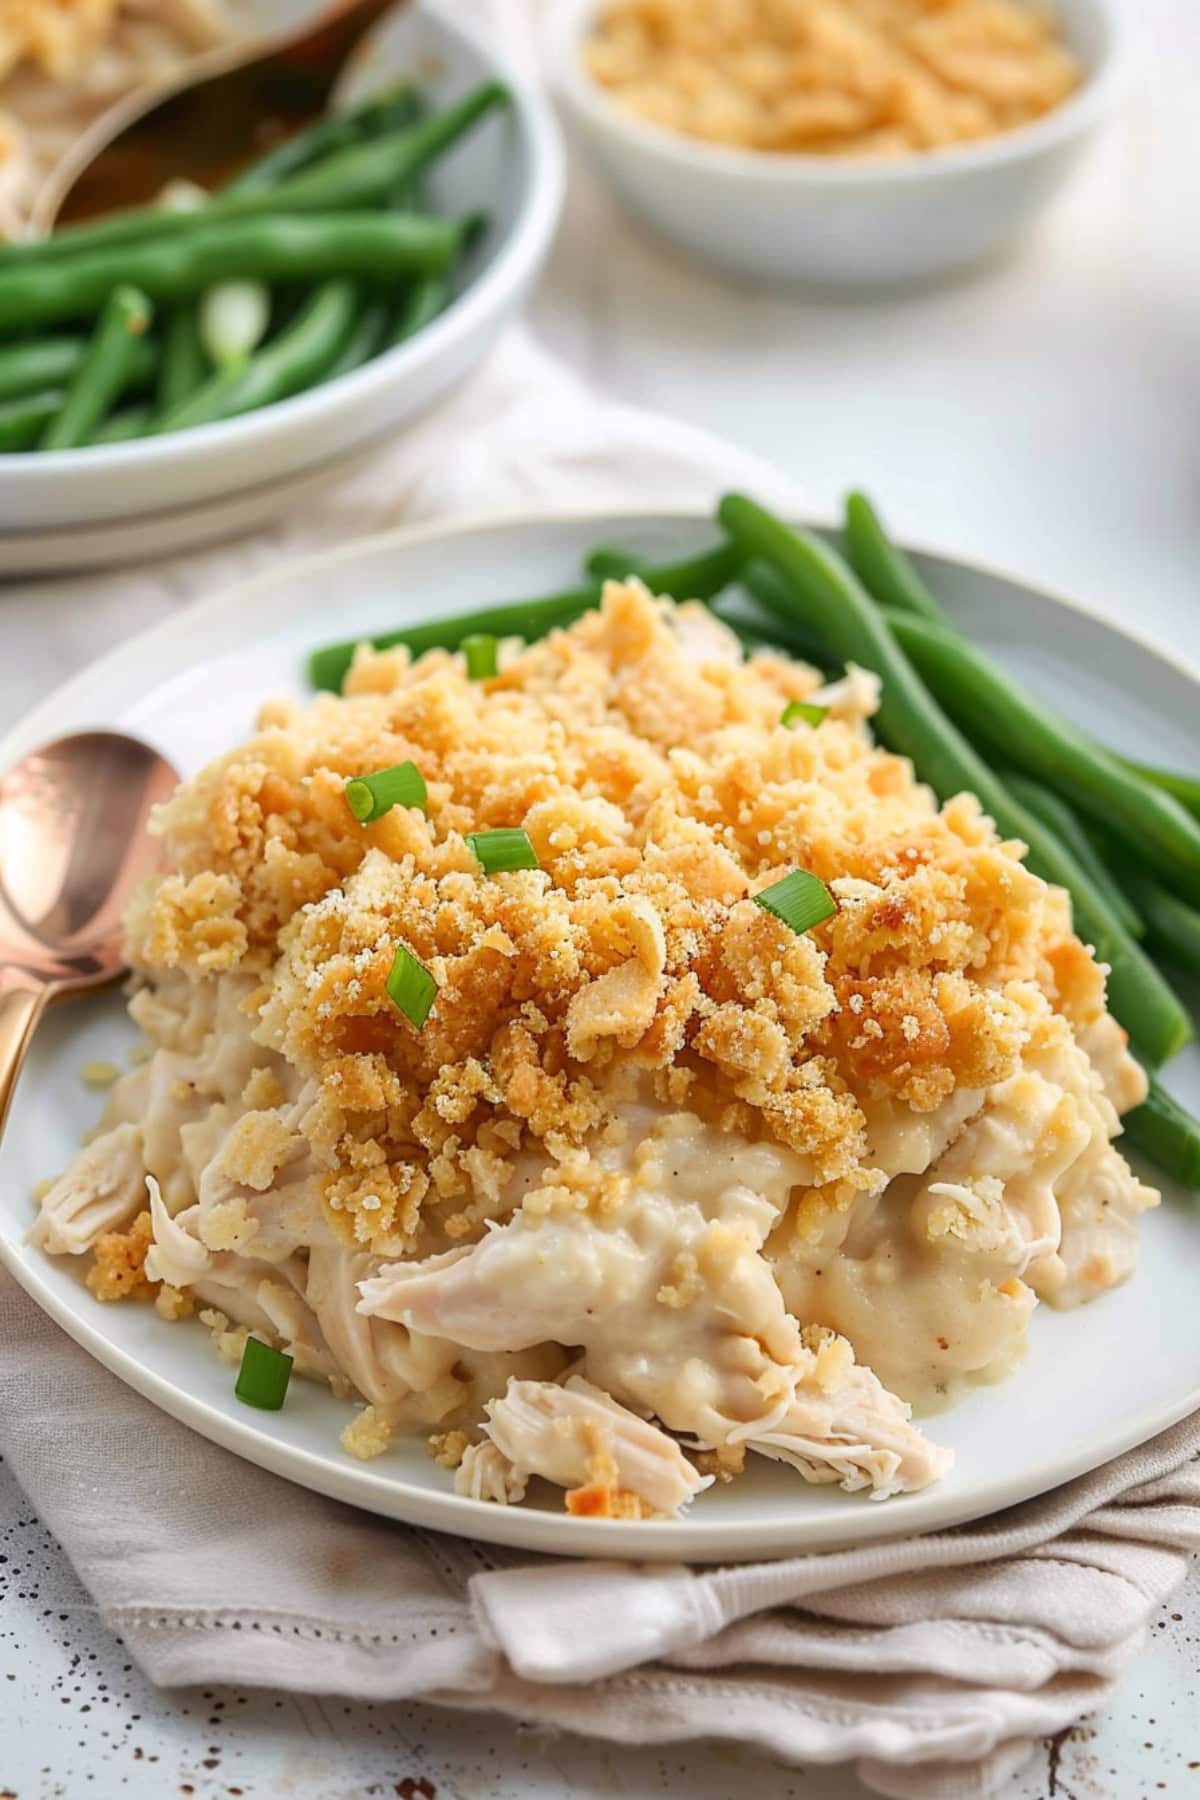 Serving of Ritz cracker chicken casserole in a white plate with green beans on the sides.